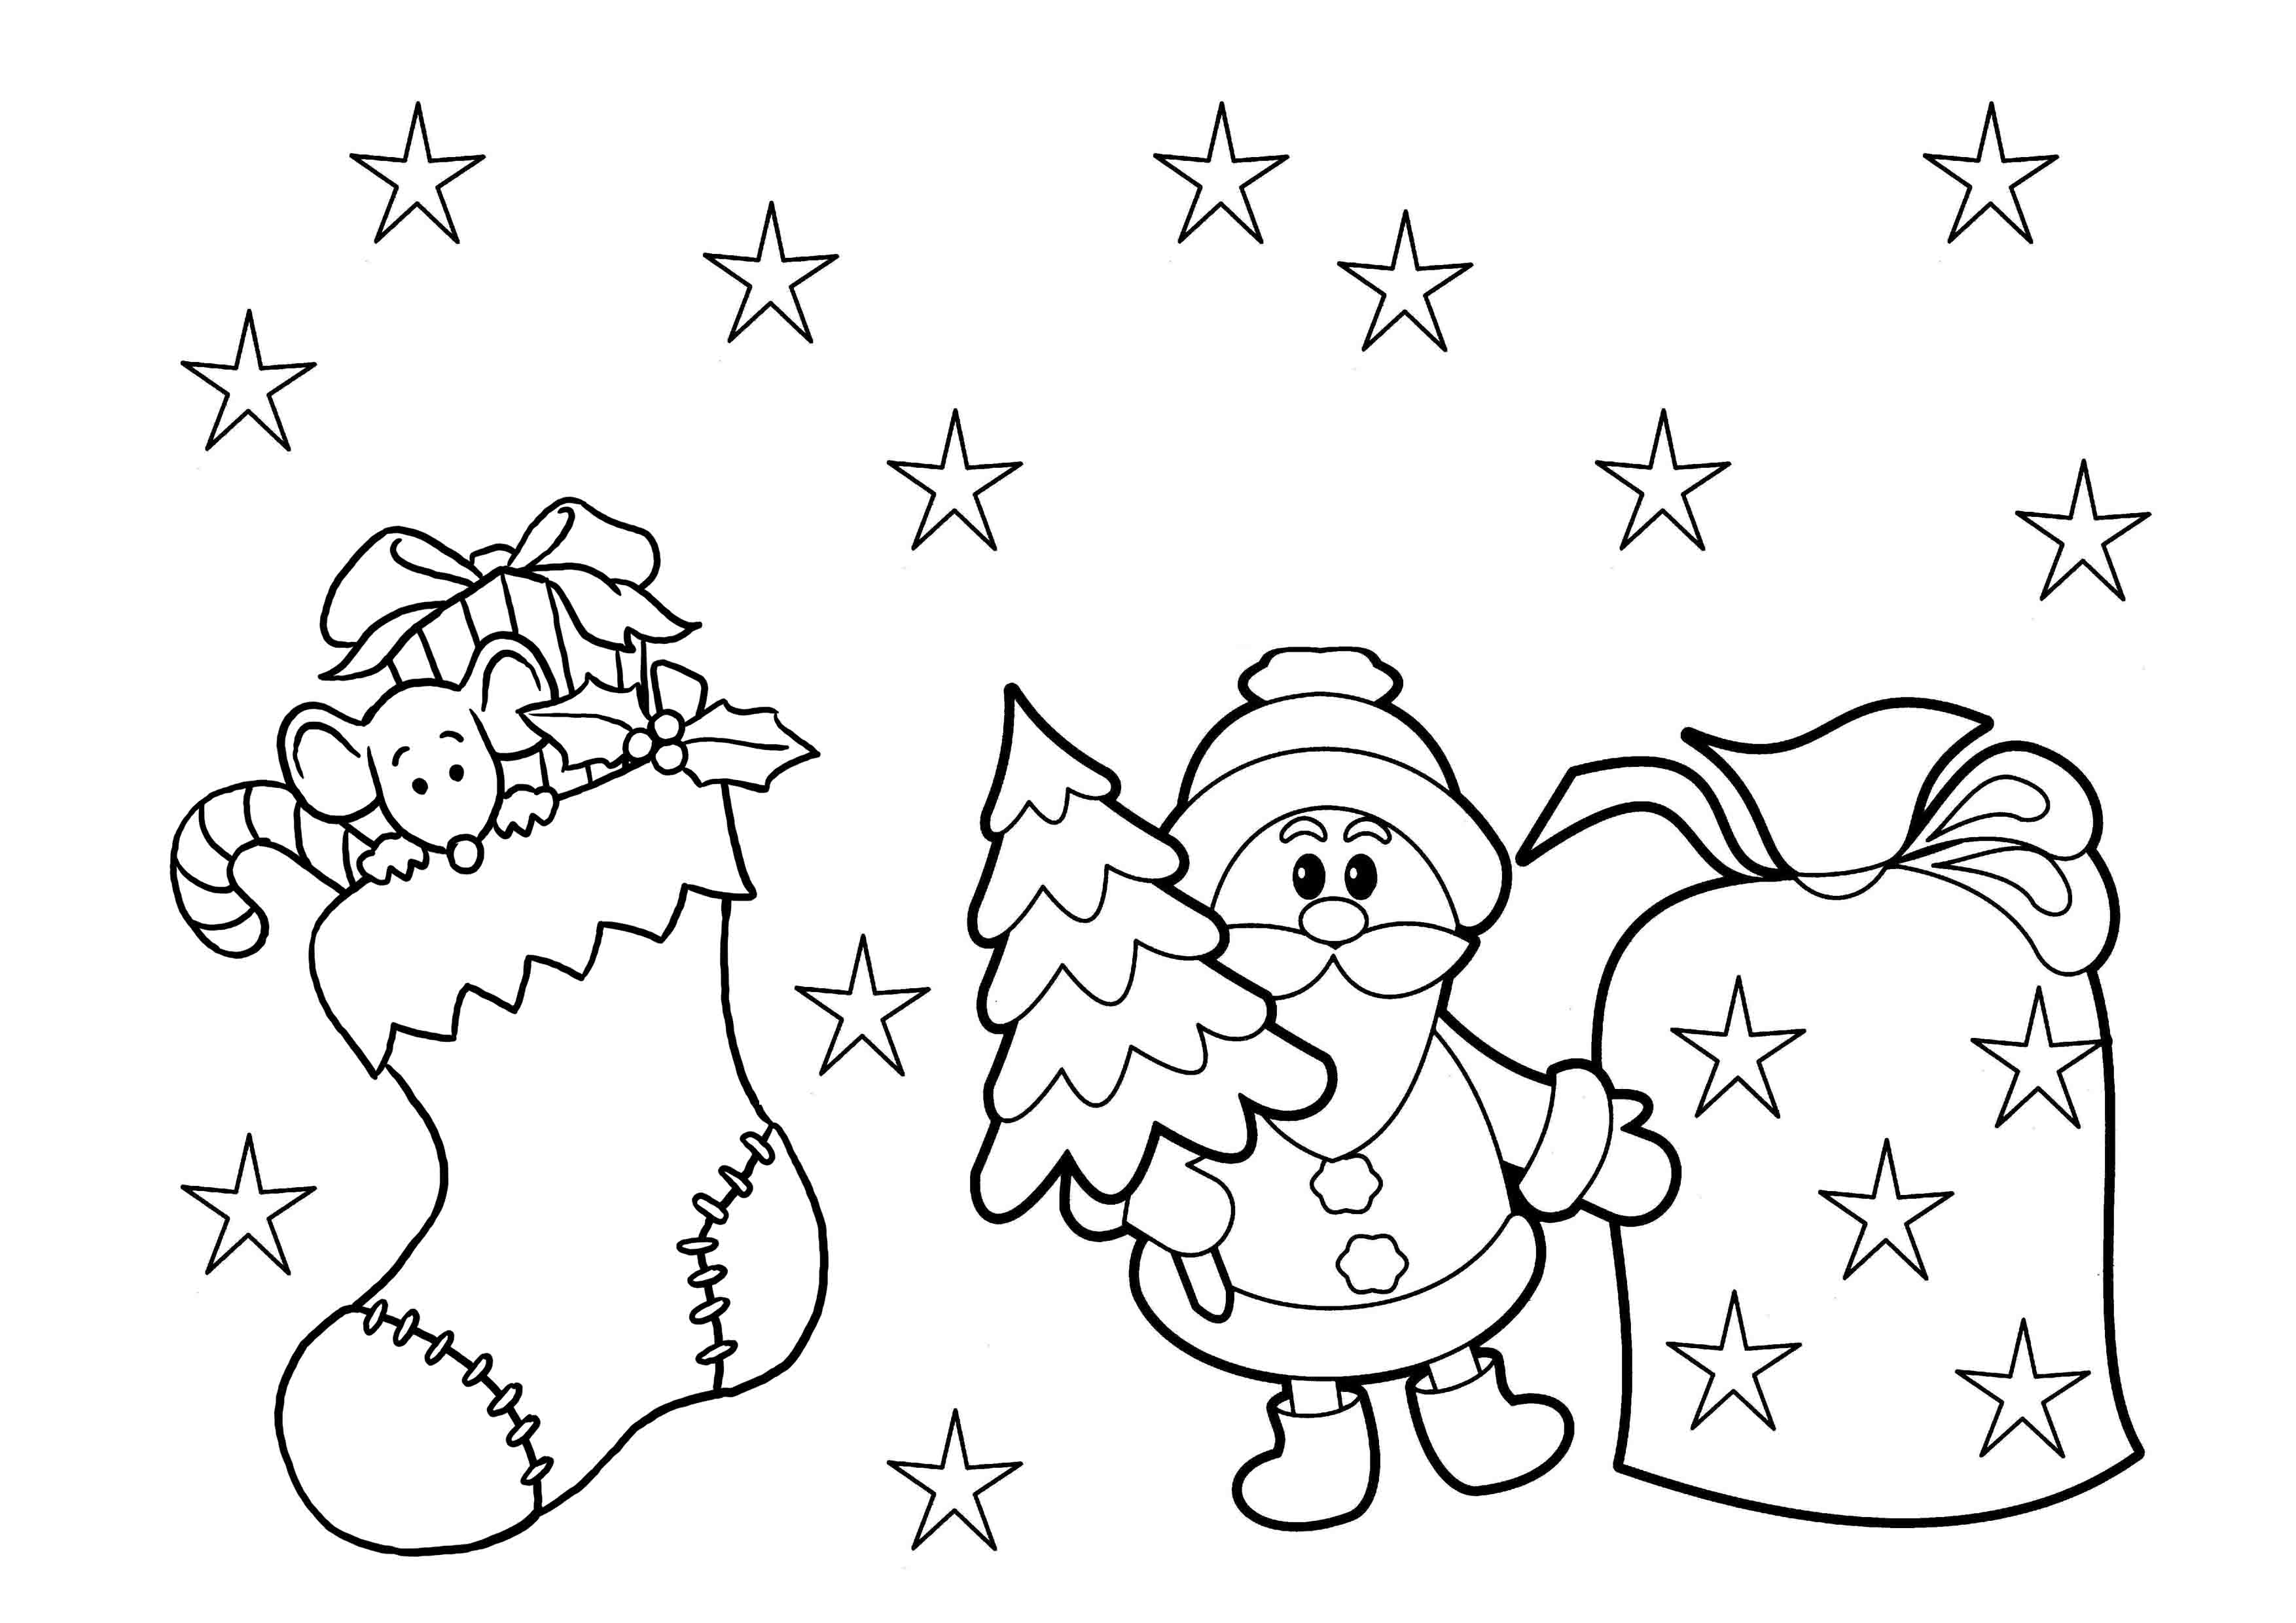 free-spongebob-christmas-coloring-pages-free-printable-download-free-spongebob-christmas